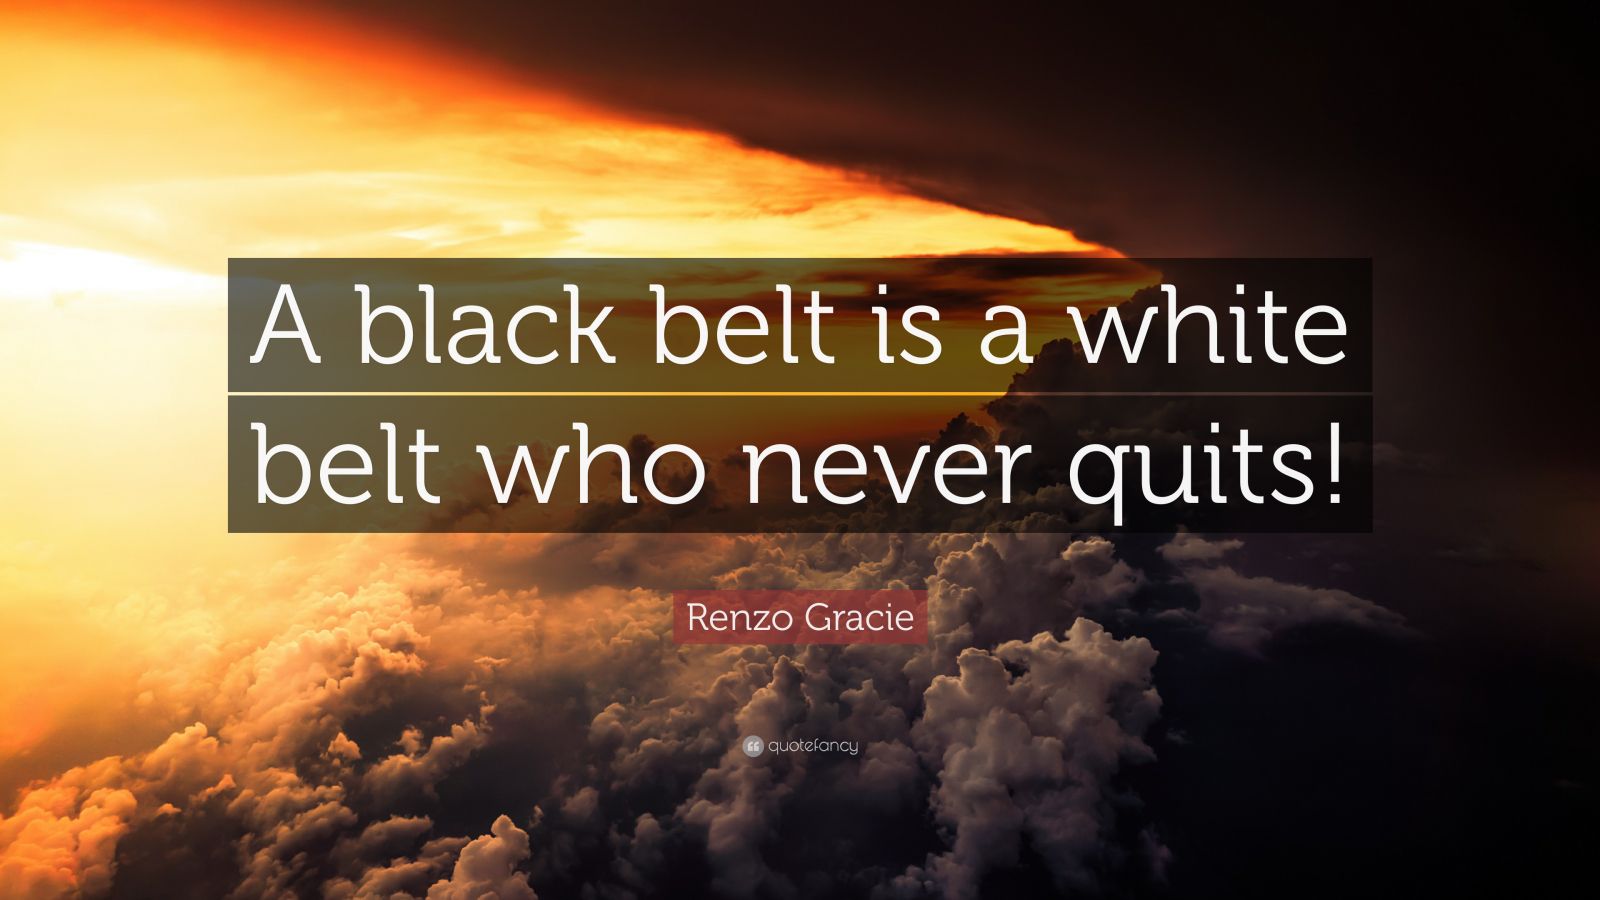 Renzo Gracie Quote: “A black belt is a white belt who never quits!” (9